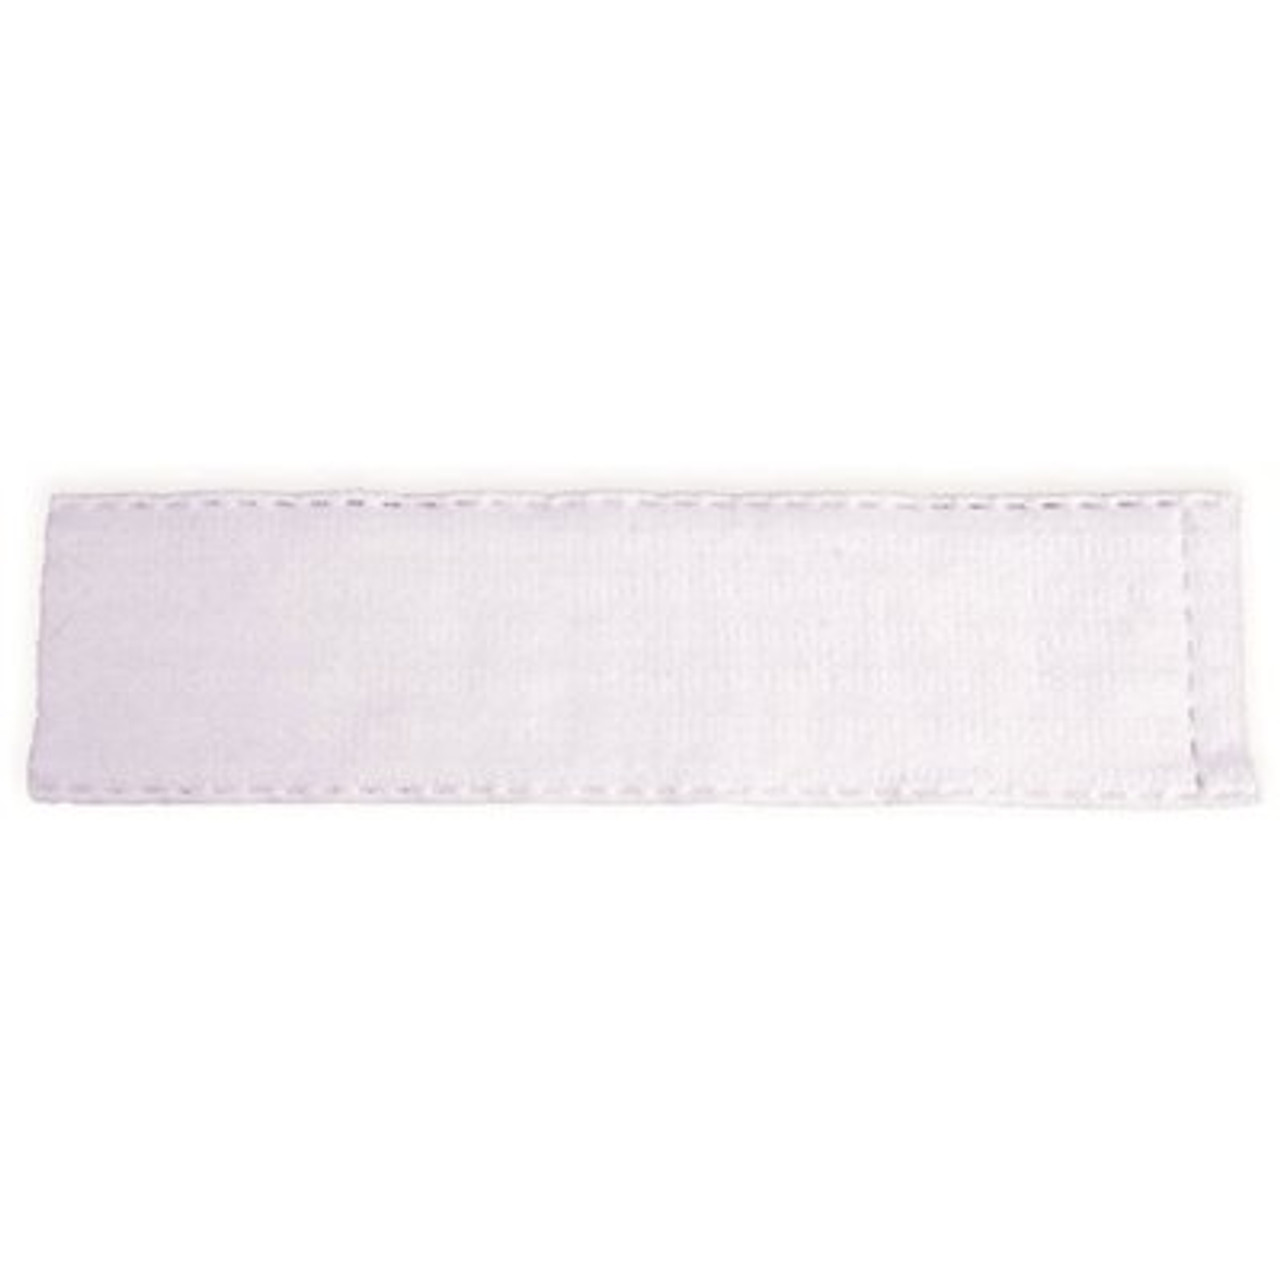 CONTEC Microfiber High Duster XF Covers 200-ct.